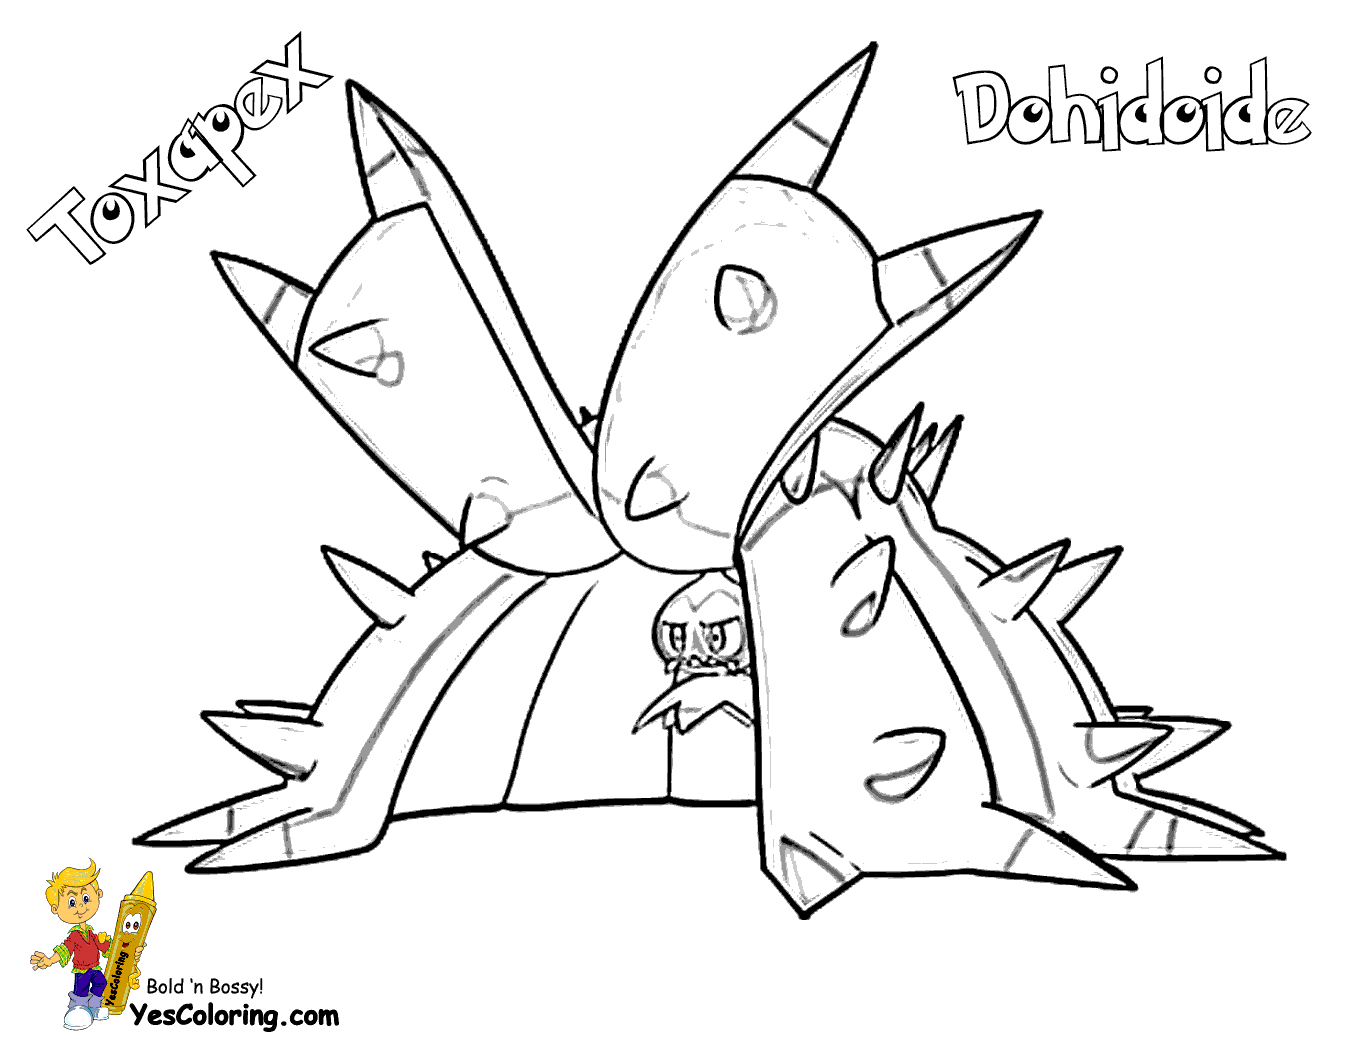 Monster Coloring Pages To Print Coloring Ideas Powerhouse Pokemon Coloring Pages To Print